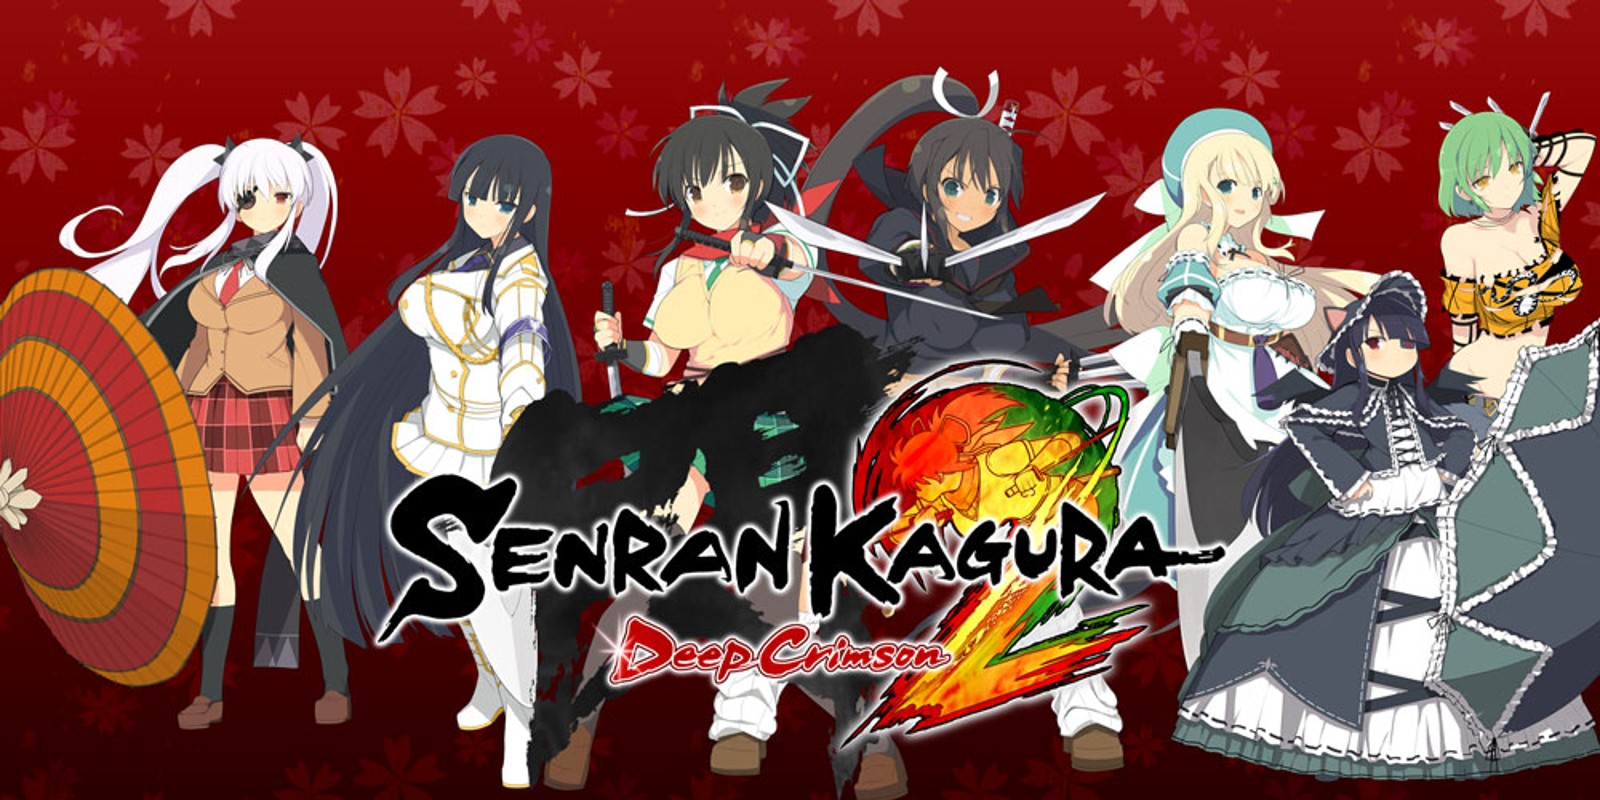 Senran Kagura 2: Deep Crimson is the sequel to Senran Kagura Burst. It is much larger and looks a lot better than the original, and also now features co-op in which several new attacks focus on it.